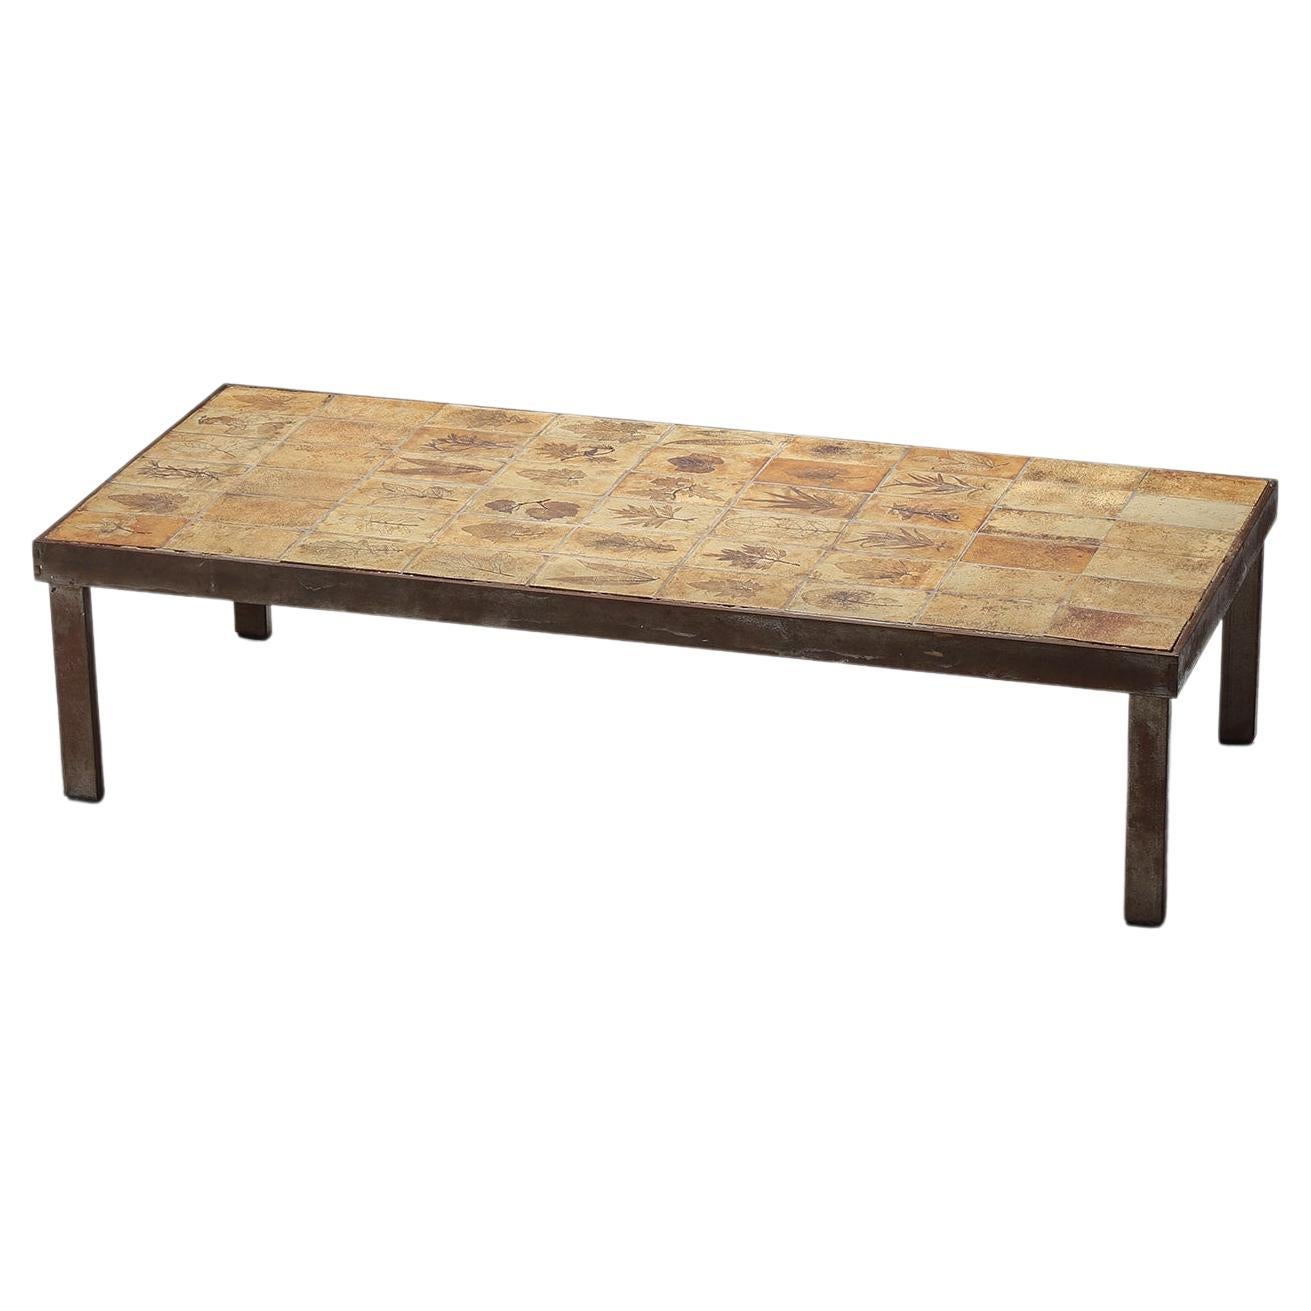 ceramic coffee table by Roger Capron dating from the 1960s Vallauris, France. For Sale